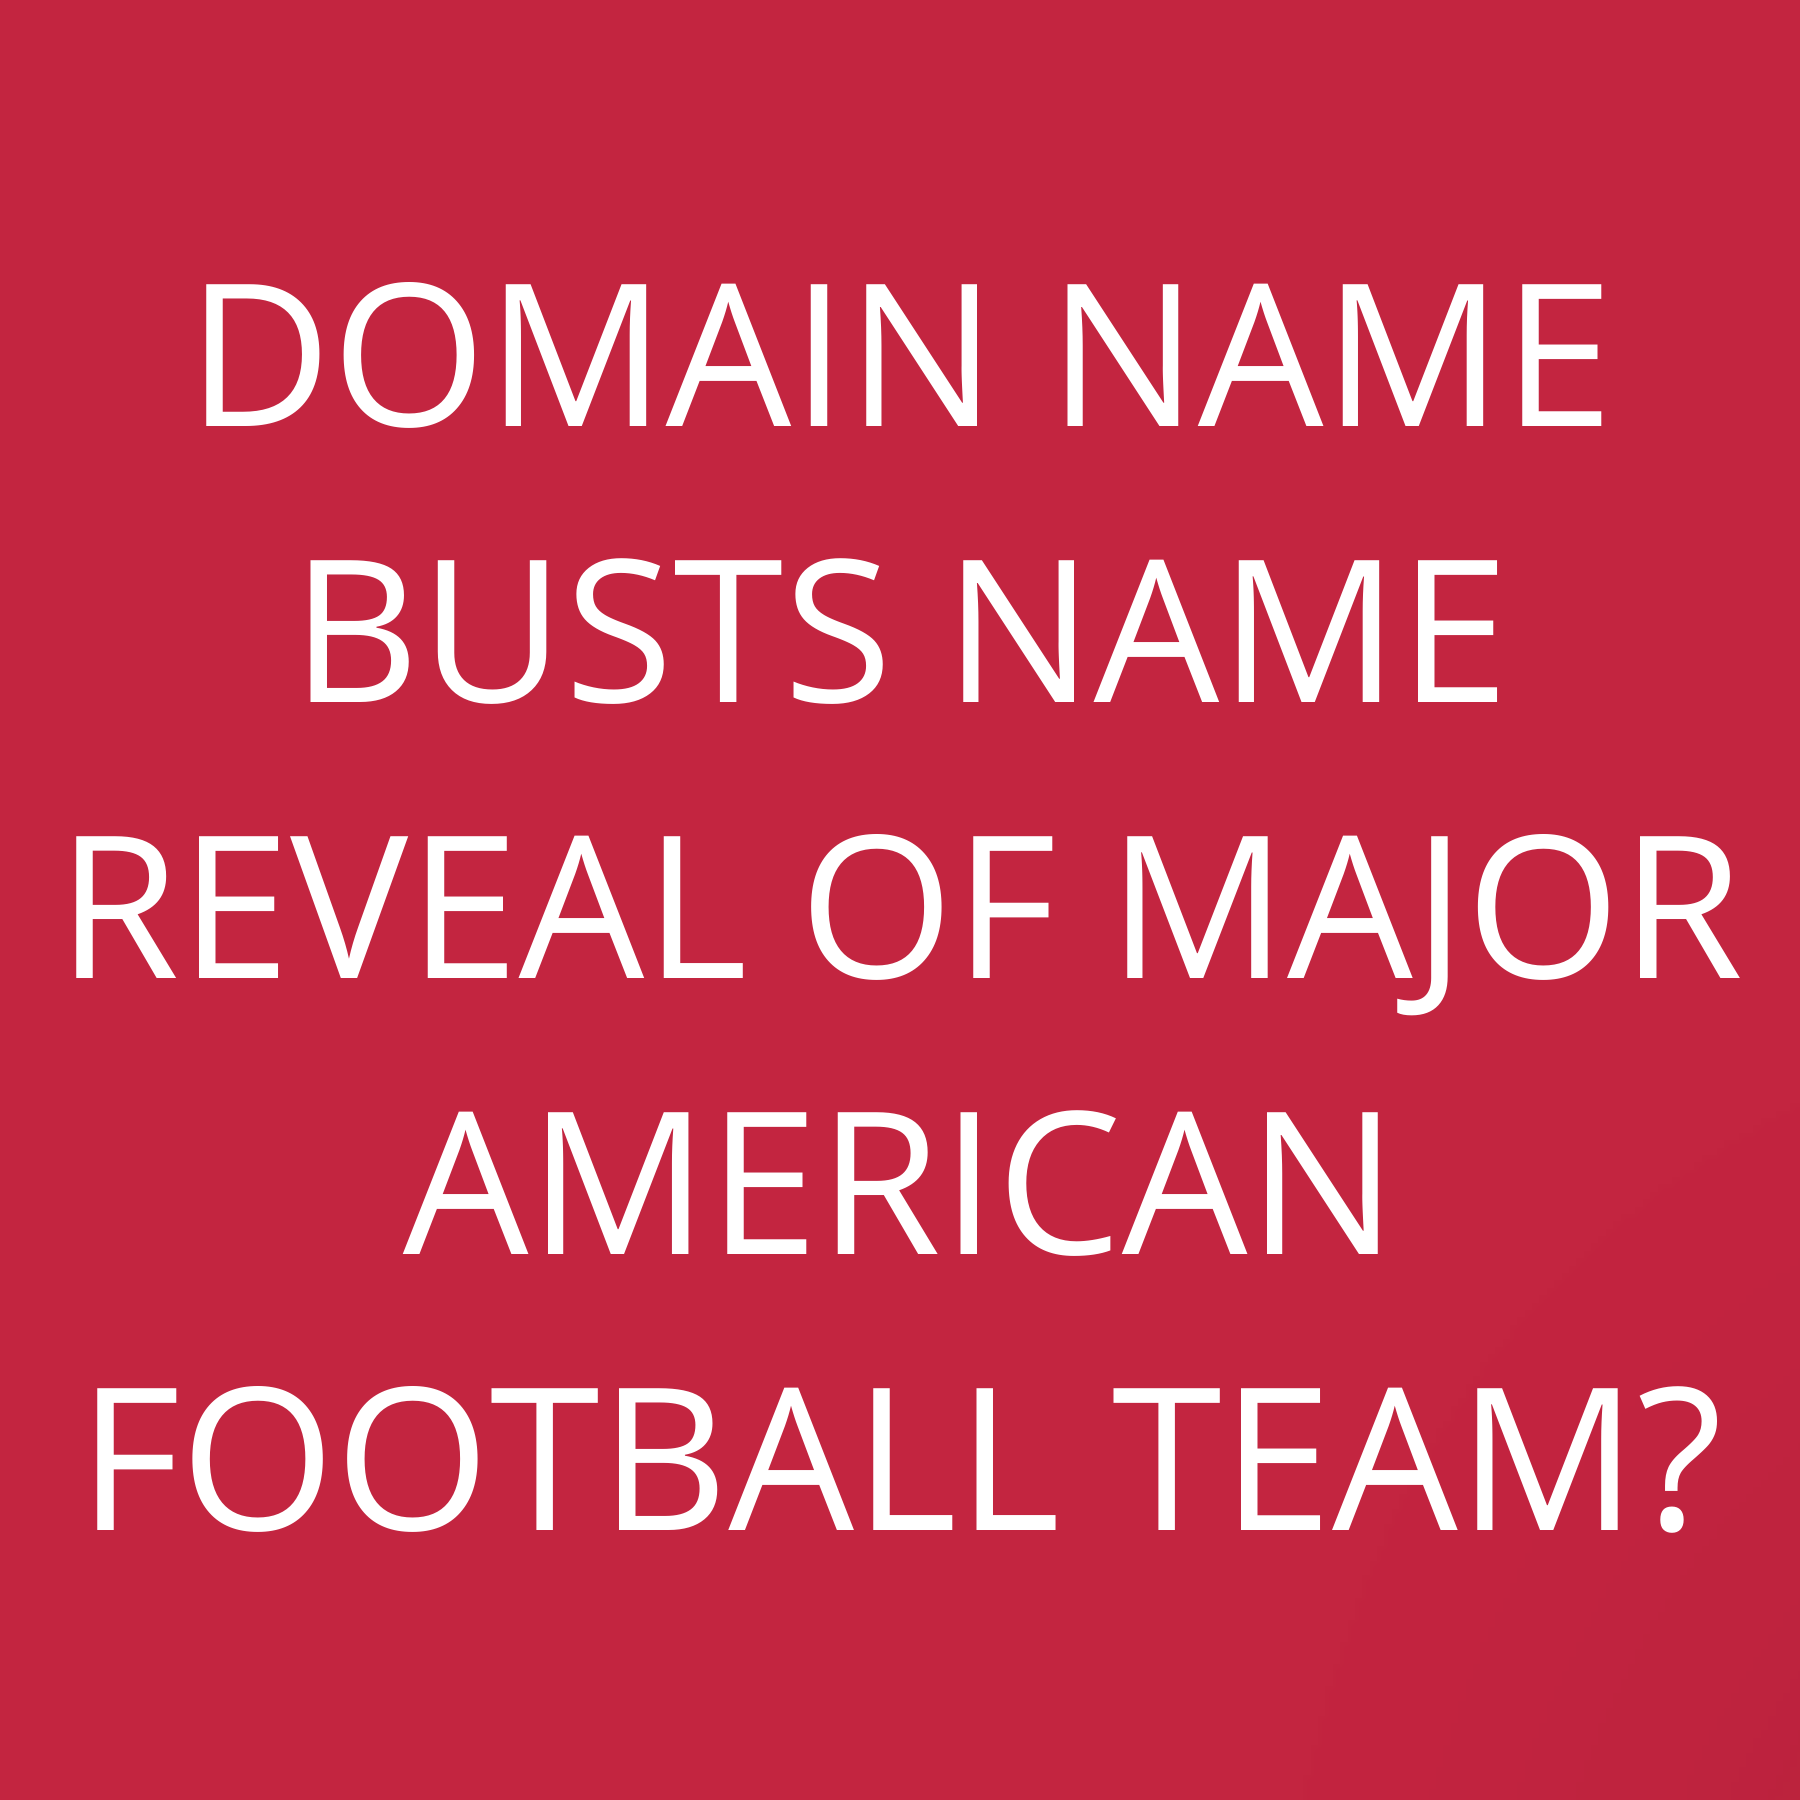 Domain Name busts name reveal of major american football team?